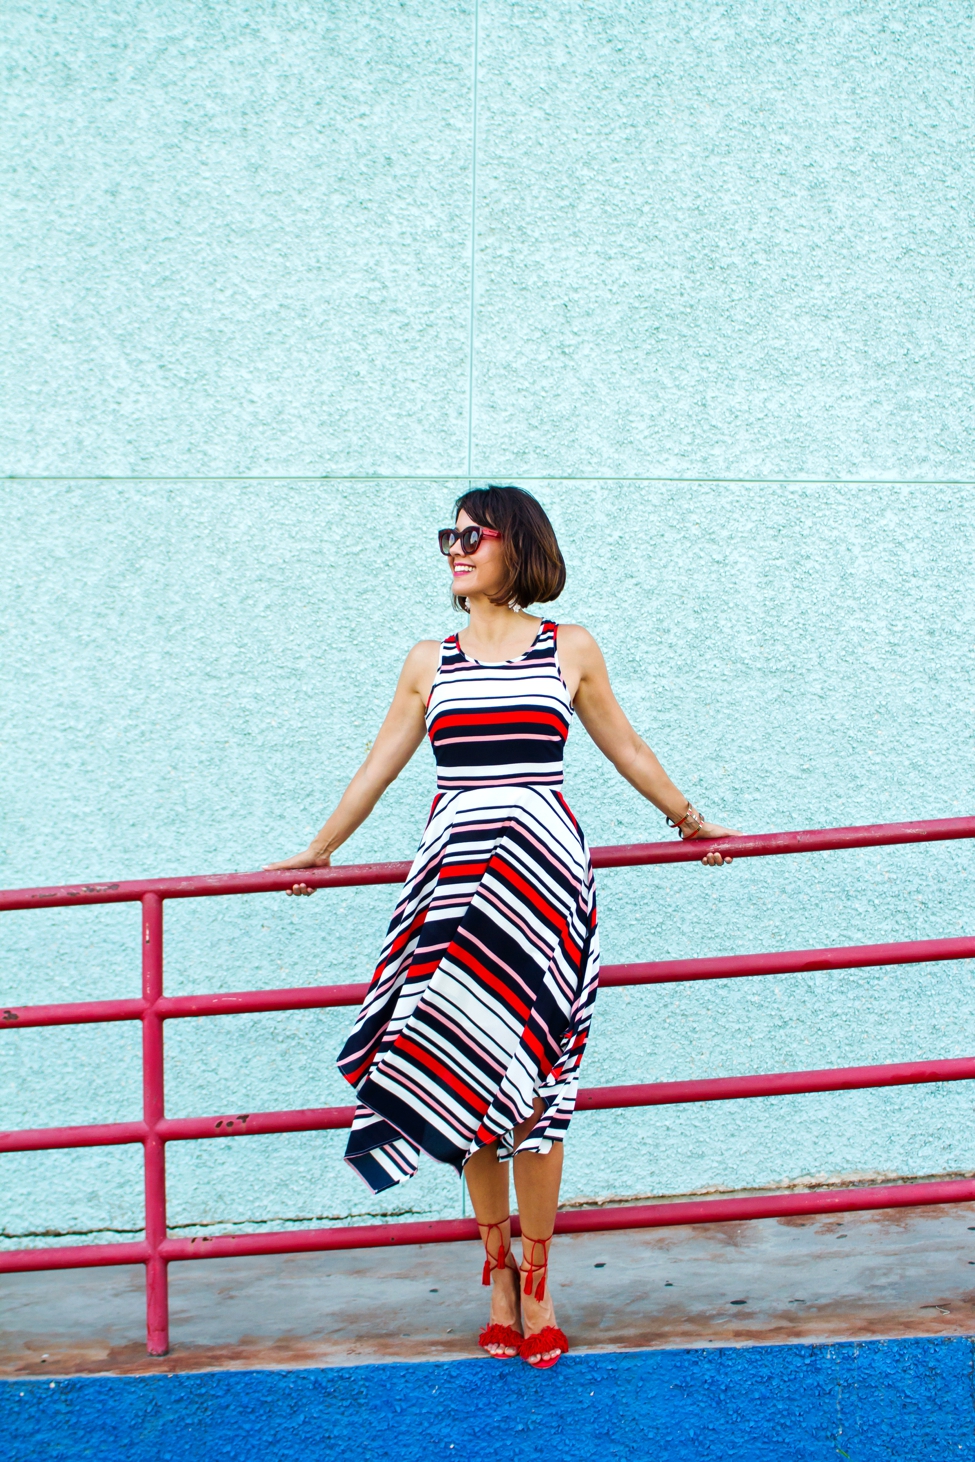 Wear Where Well ModCloth Workwear Red White Blue dress_0010